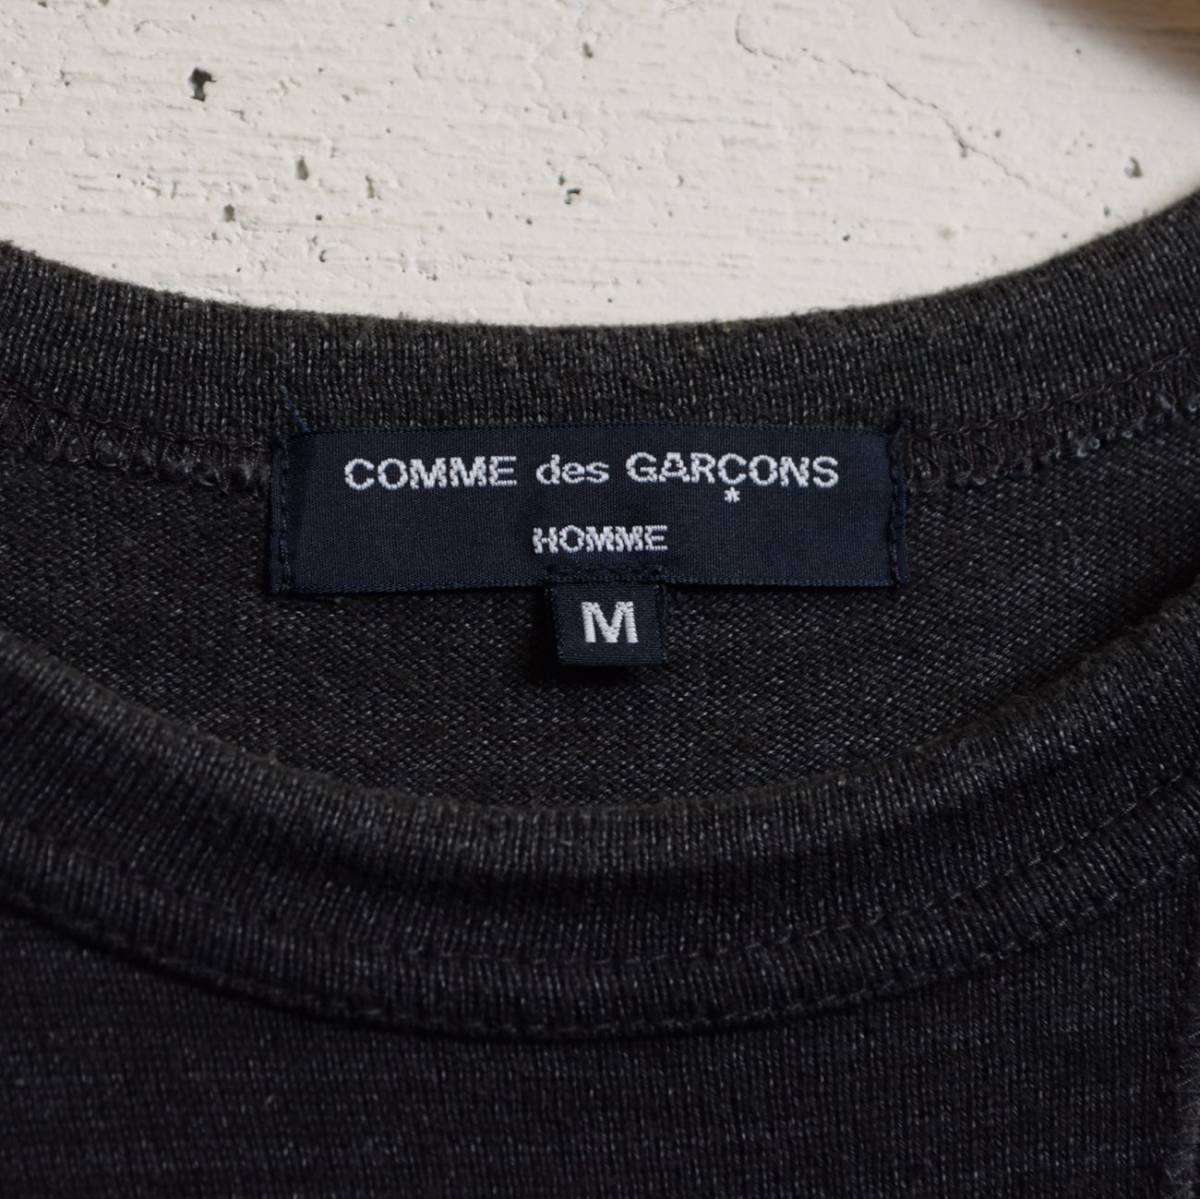 COMME des GARCONS HOMME 18AW パッチワーク Tシャツ size M